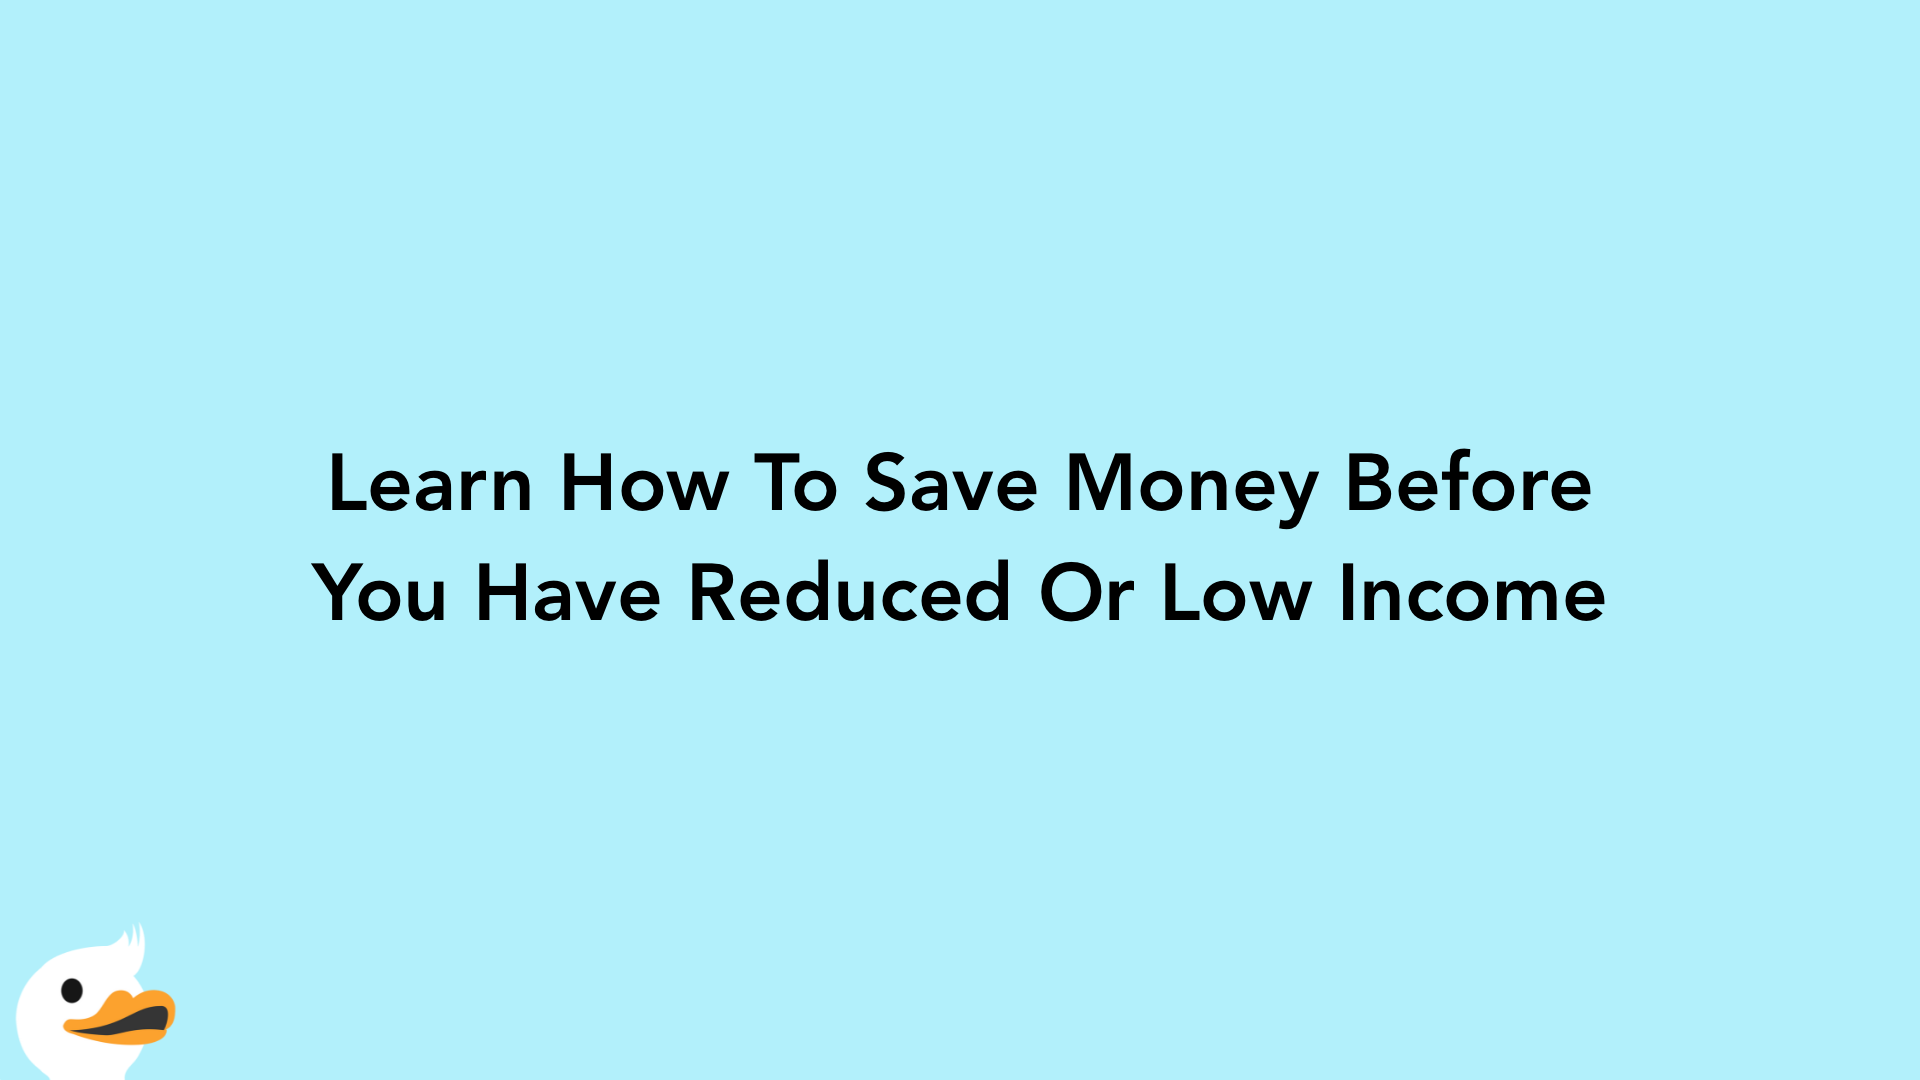 Learn How To Save Money Before You Have Reduced Or Low Income